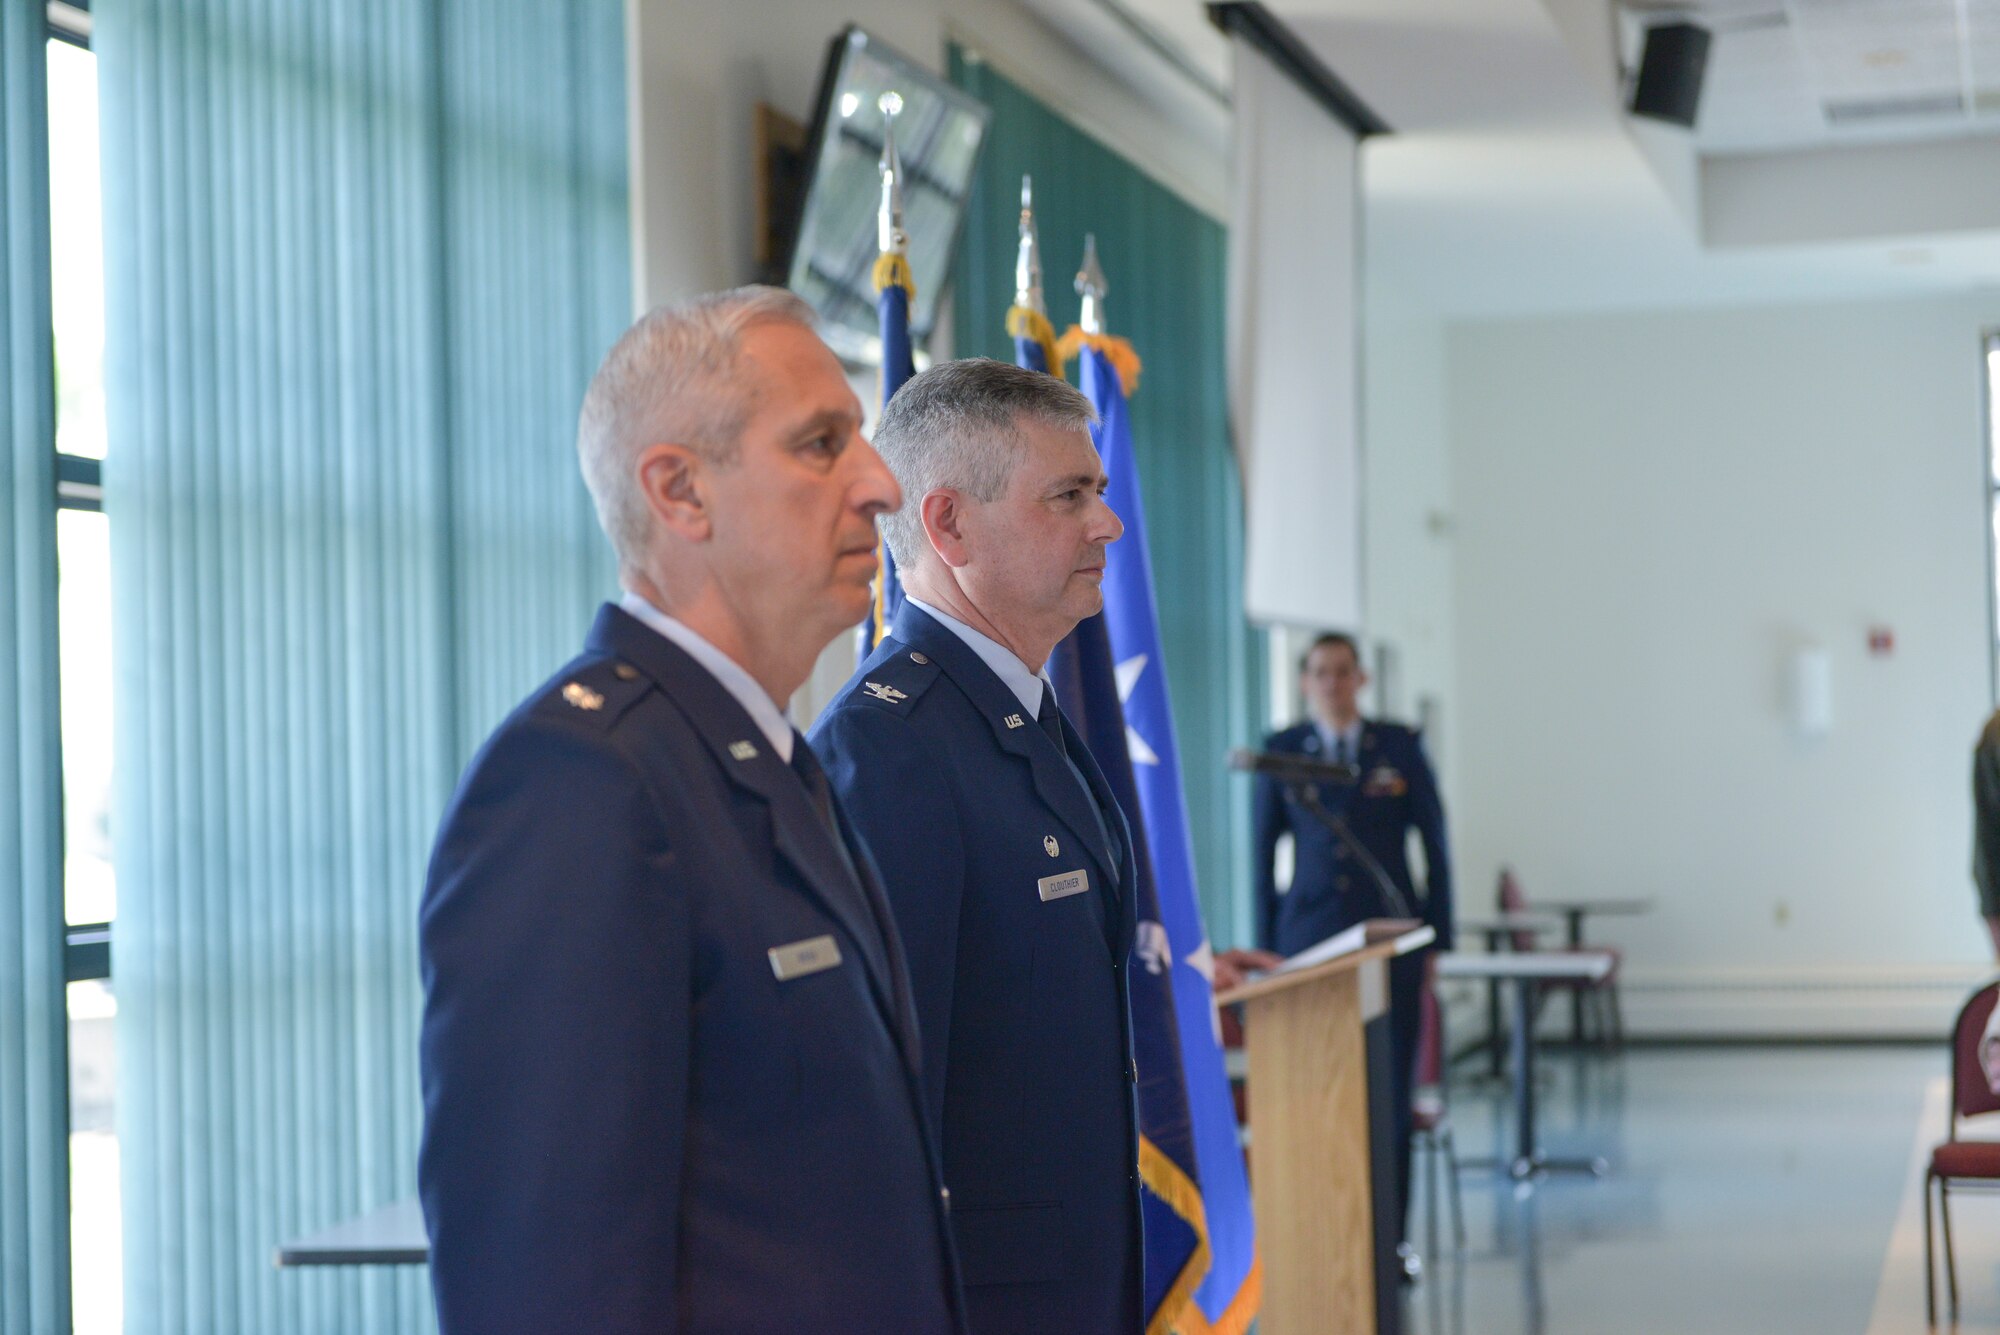 Lt. Col. Alan Ross (left), 109th Airlift Wing vice commander, and Col. Shawn Clouthier, 109th AW commander, stand at attention as Ross' promotion order to colonel is read during his promotion ceremony at Stratton Air National Guard Base, New York, on April 19, 2015. Ross took over as vice commander in October of 2014. (U.S. Air National Guard photo by Mater Sgt. William Gizara/Released)